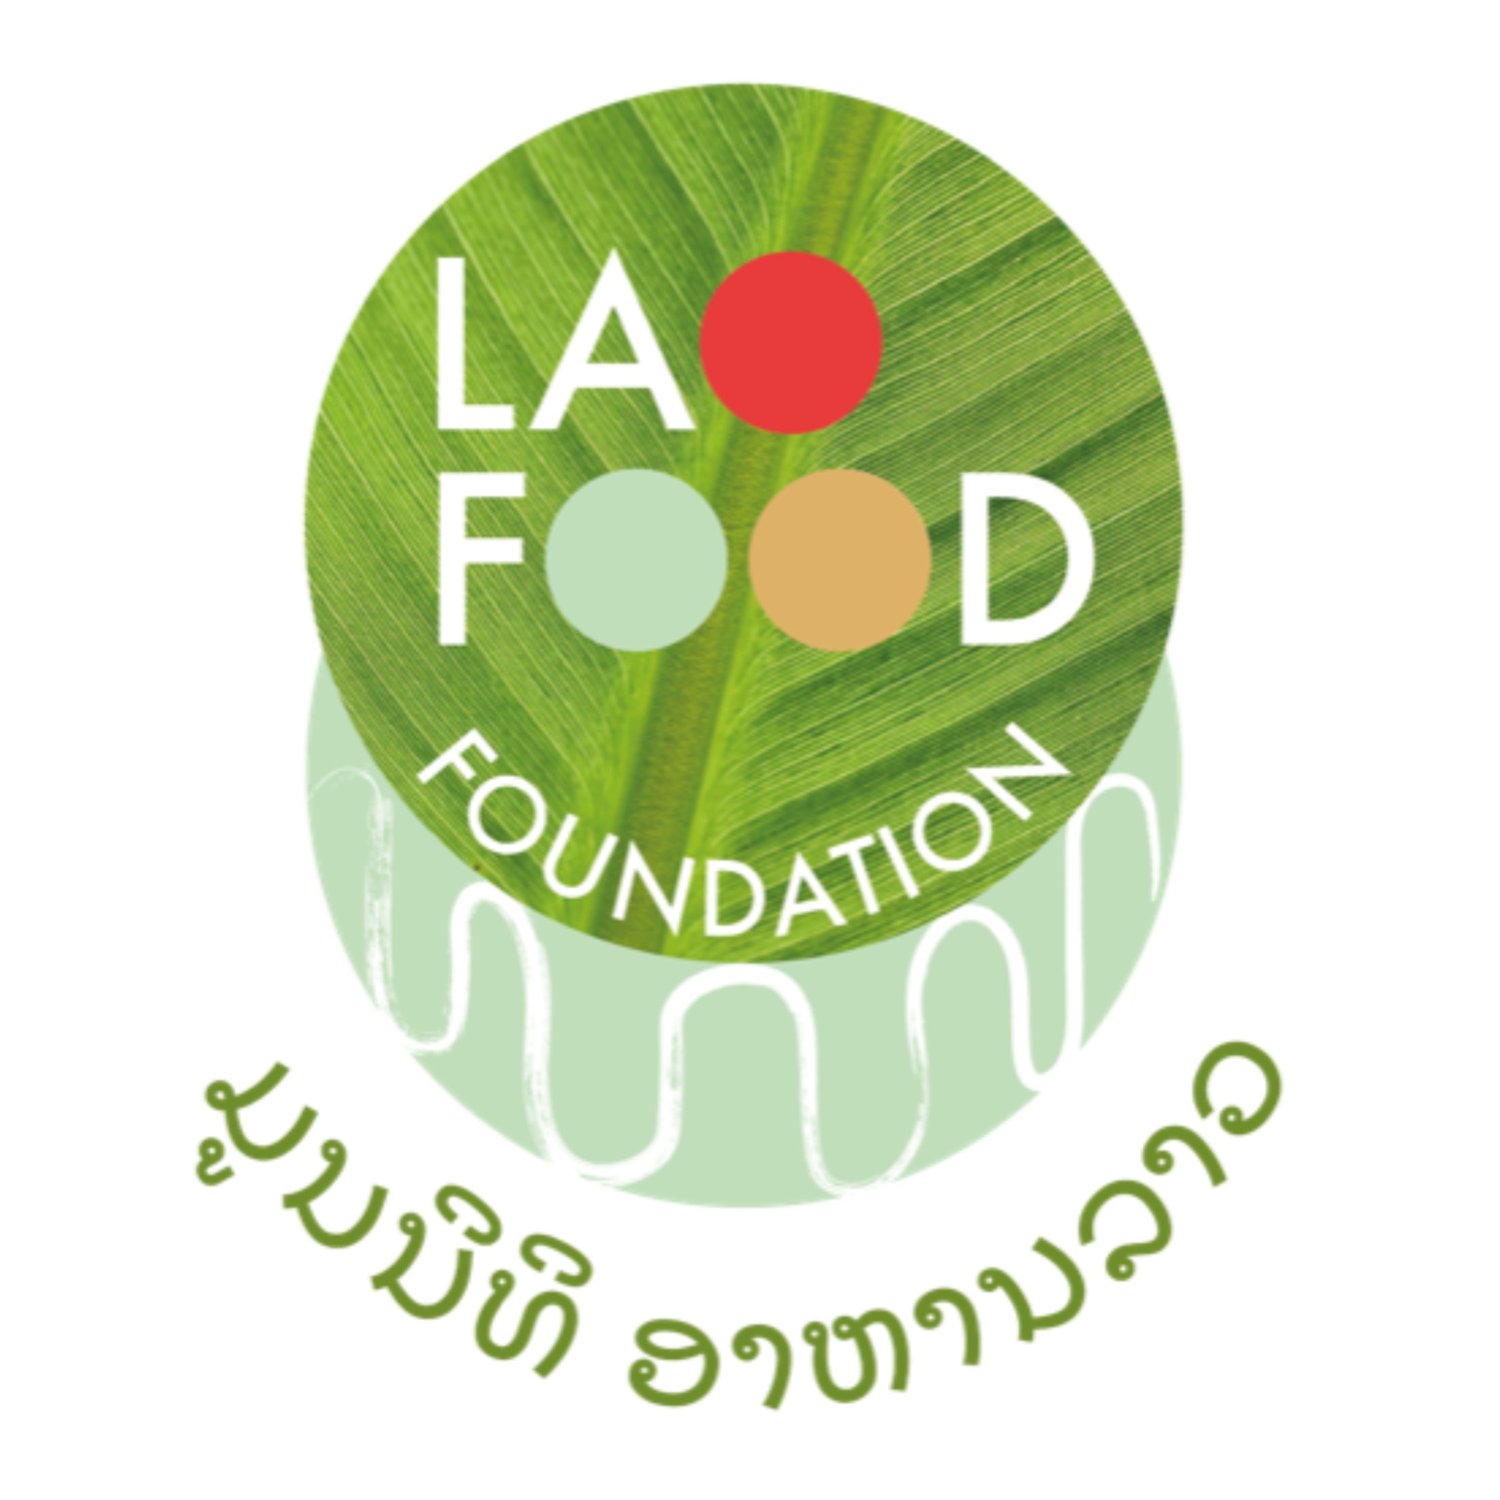 The Lao Food Foundation